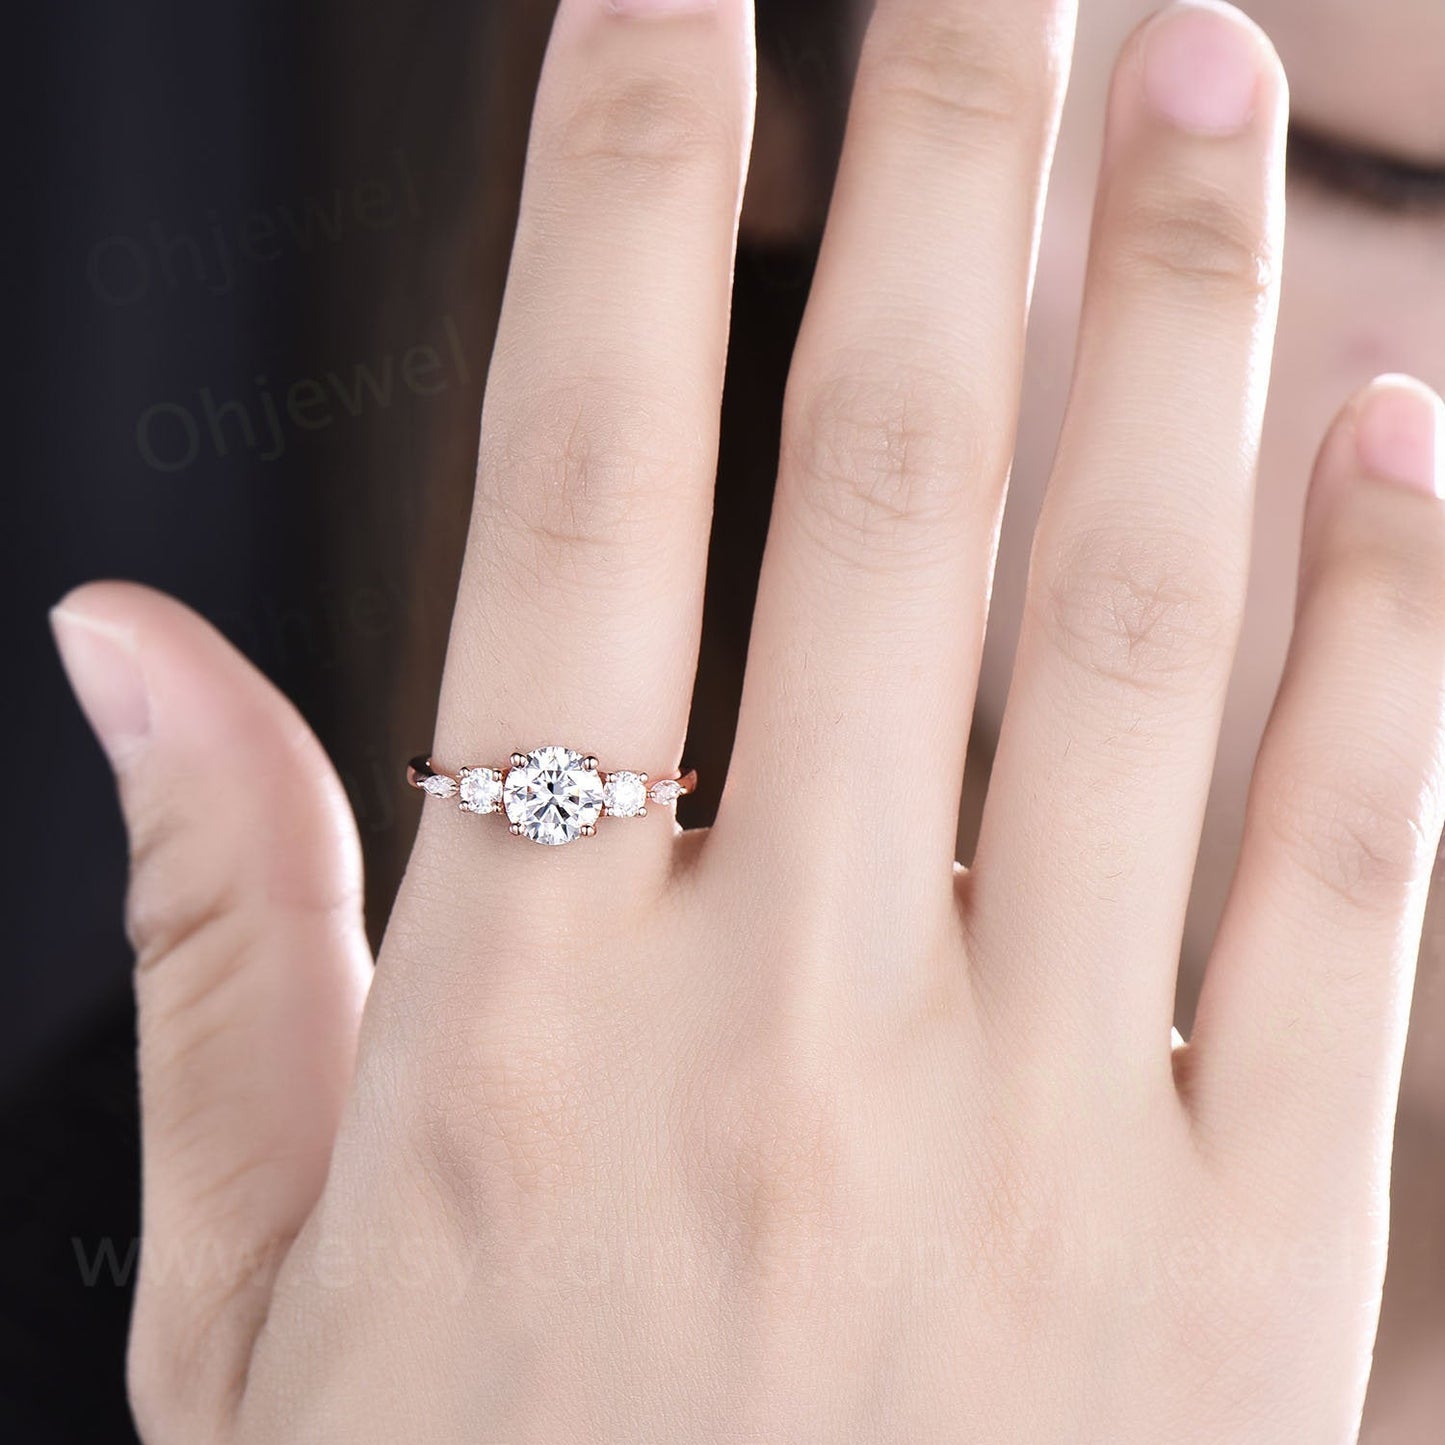 Unique moissanite ring gold silver vintage moissanite engagement ring rose gold art deco stacking ring round cut ring promise ring for women